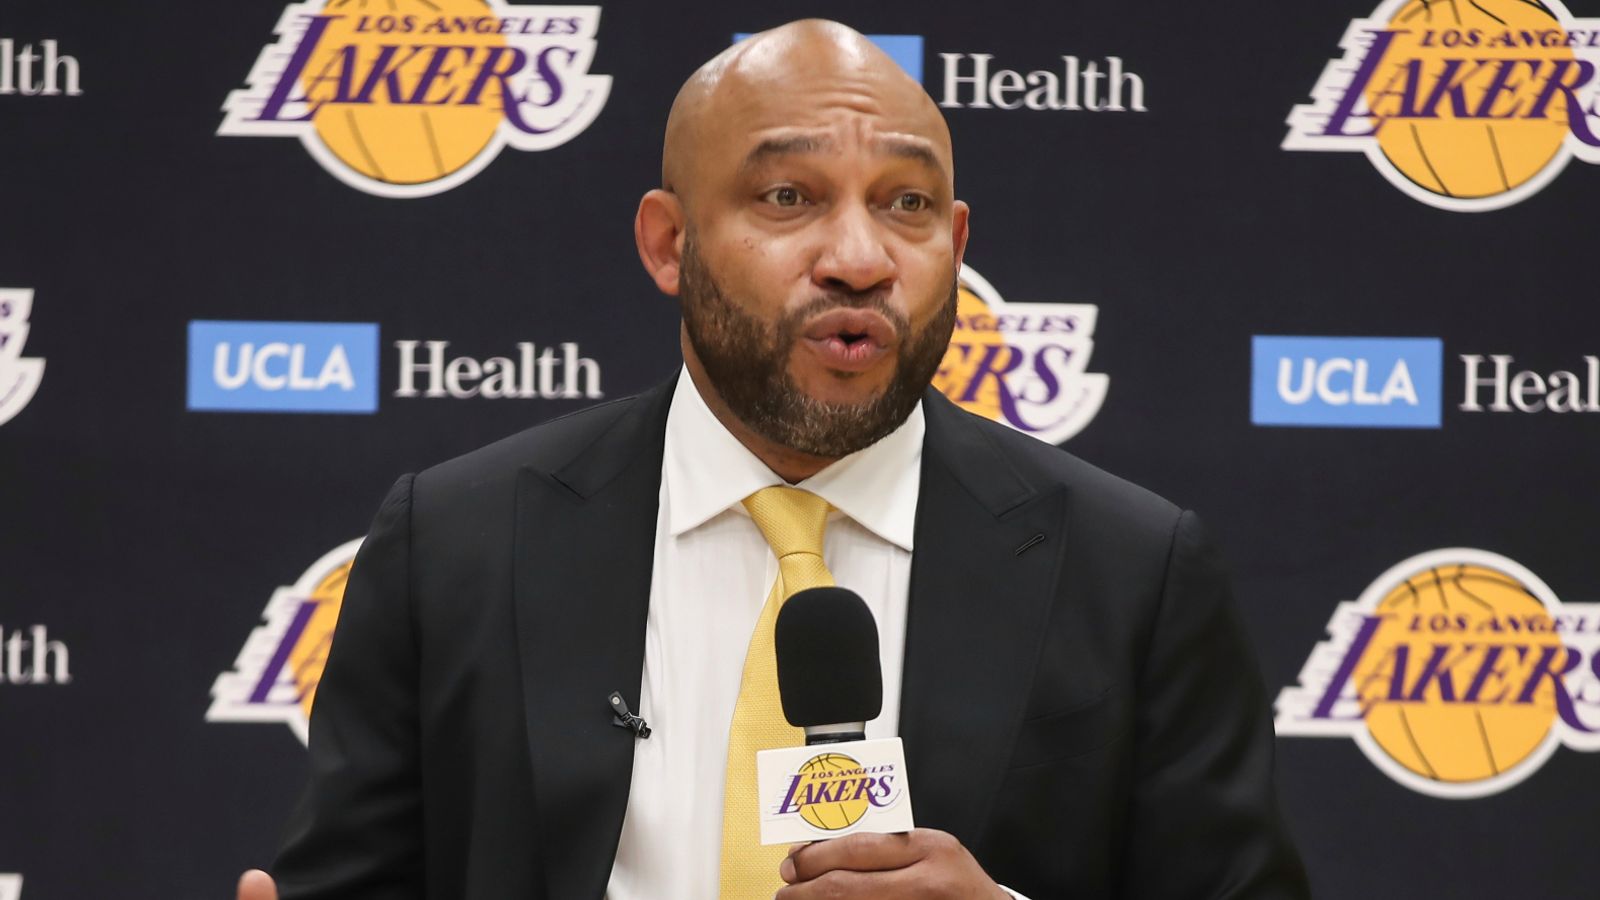 Darvin Ham: Los Angeles Lakers’ new head coach impresses in media unveiling as he outlines franchise turnaround plan